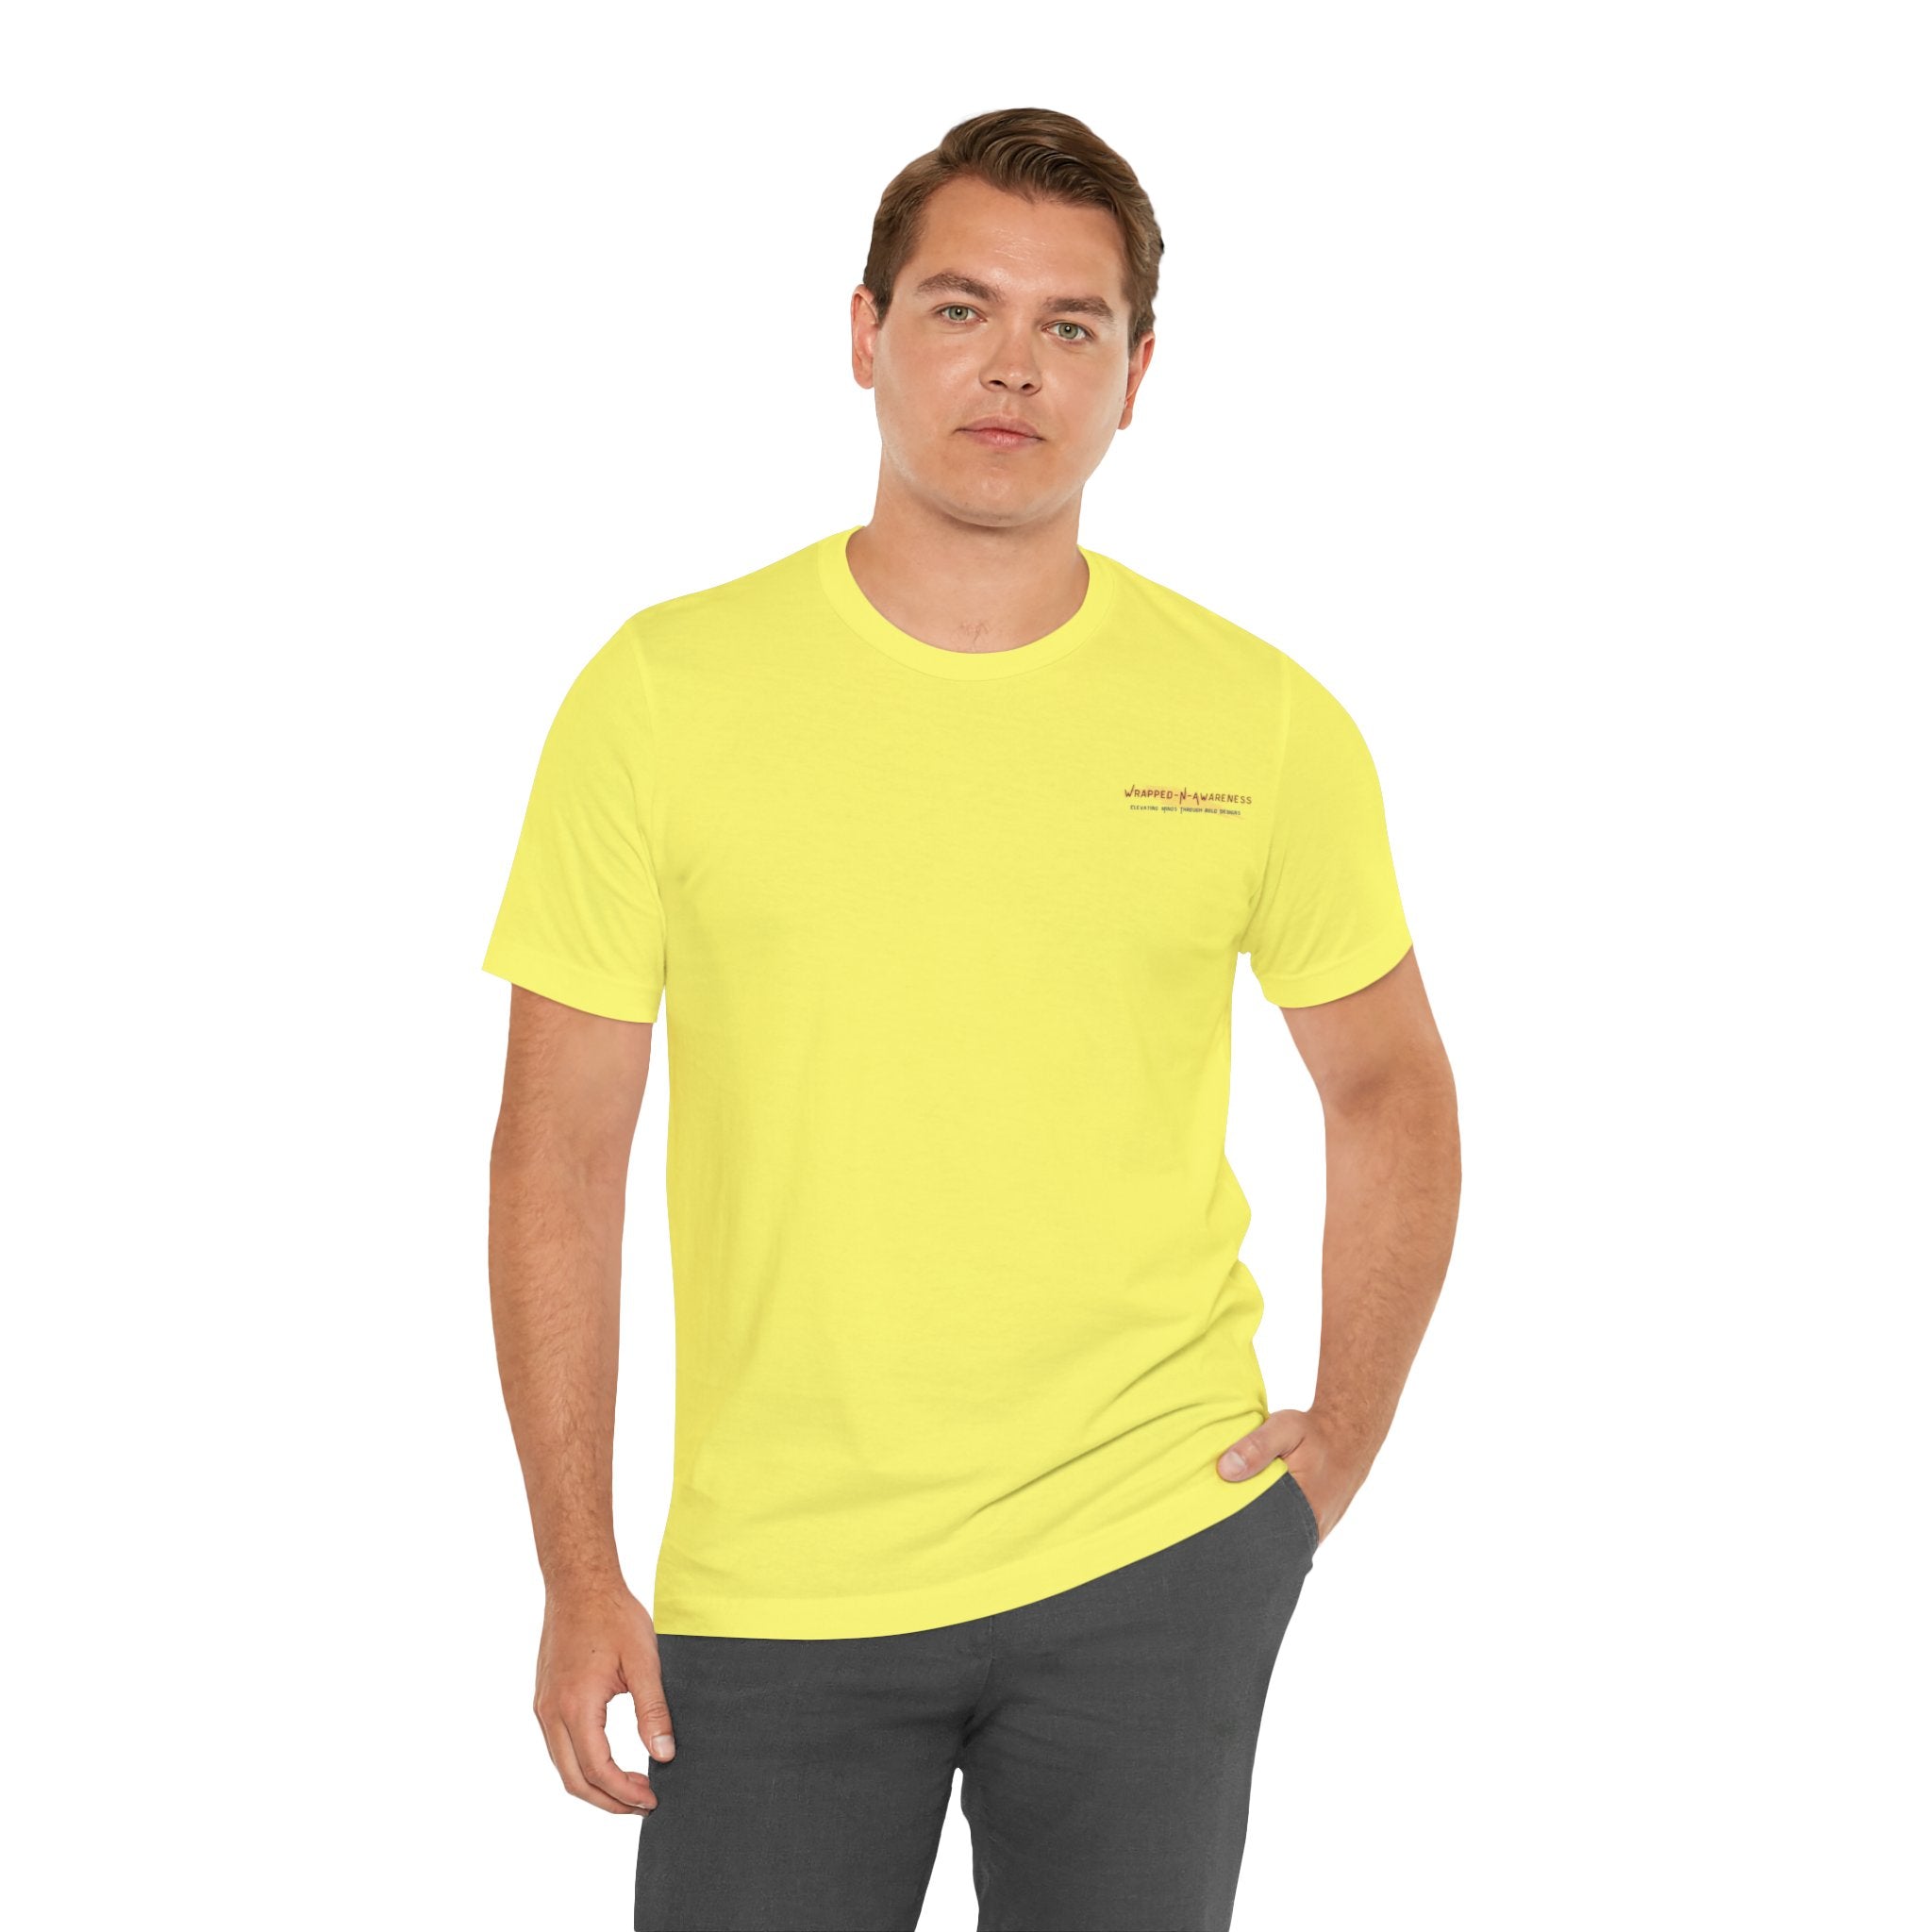 Progress Over Perfection Tee - Bella+Canvas 3001 Yellow Airlume Cotton Bella+Canvas 3001 Crew Neckline Jersey Short Sleeve Lightweight Fabric Mental Health Support Retail Fit Tear-away Label Tee Unisex Tee T-Shirt 13332667481072560653_2048 Printify